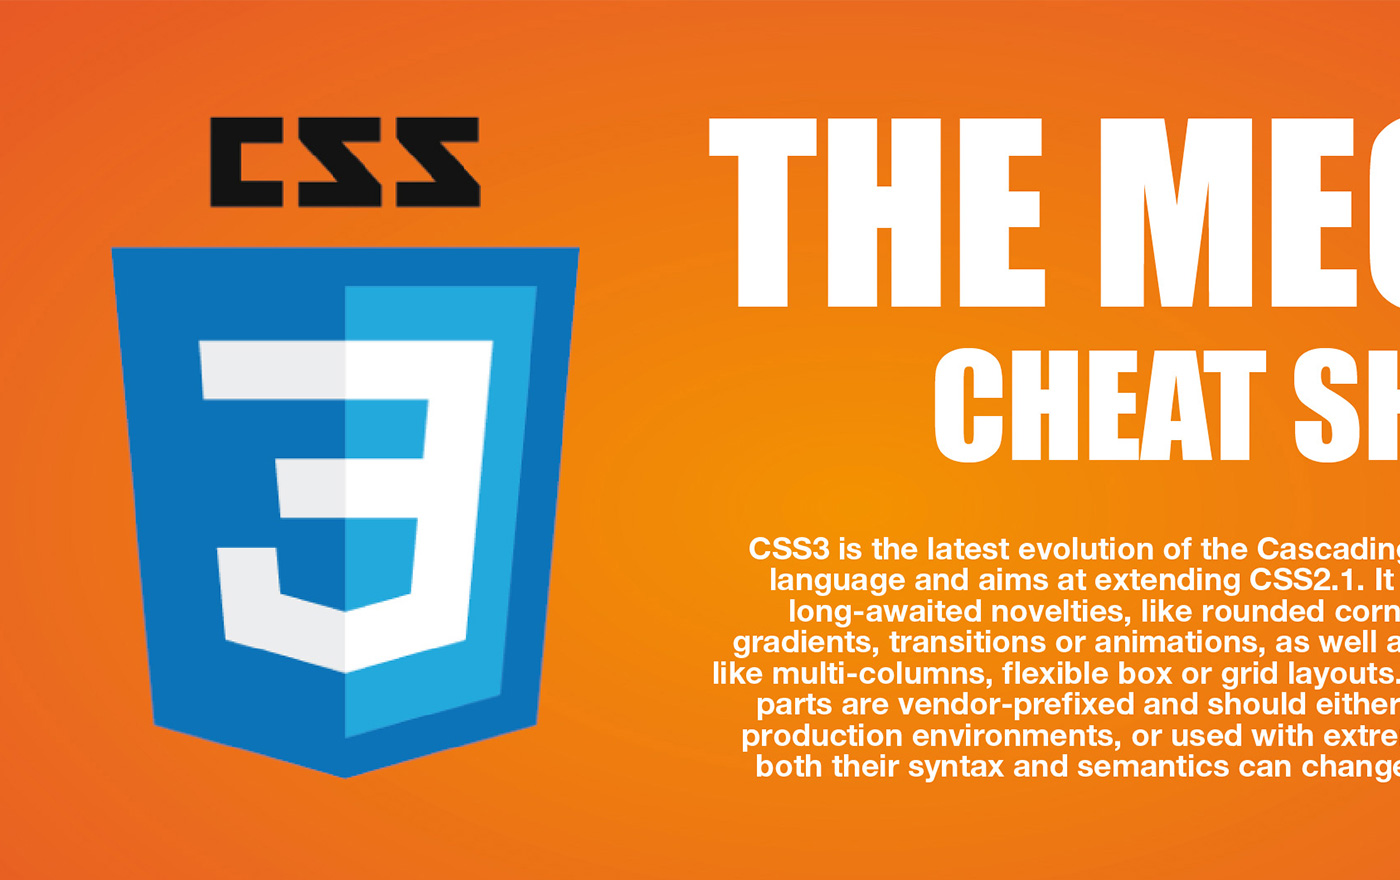 The Mega CSS3 Cheat Sheet Infographic